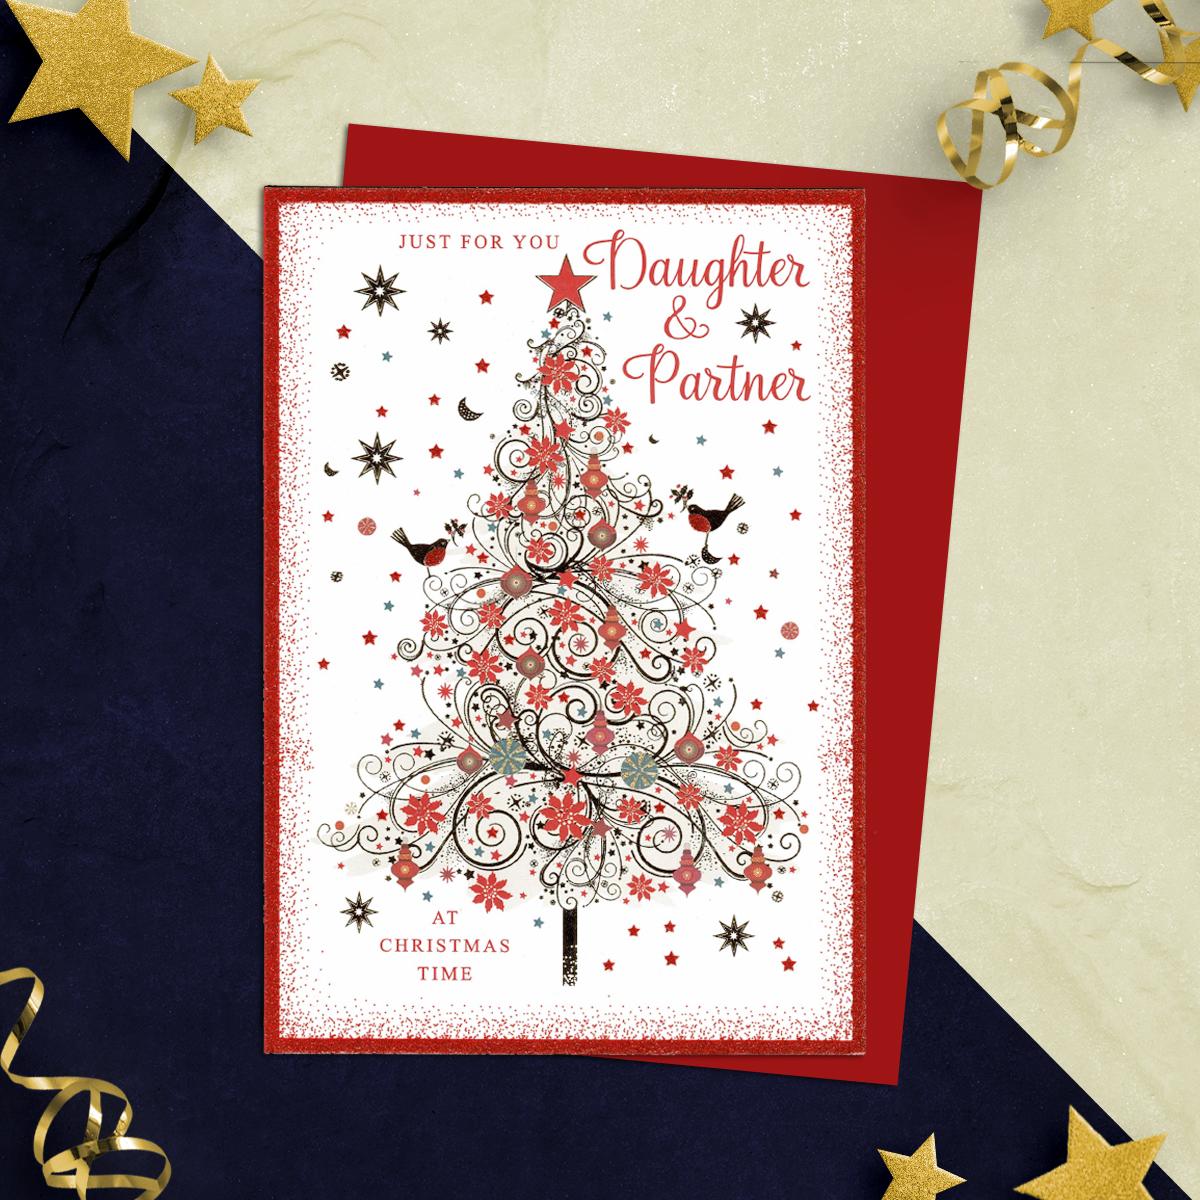 Daughter And Partner Christmas Card Alongside Its Red Envelope